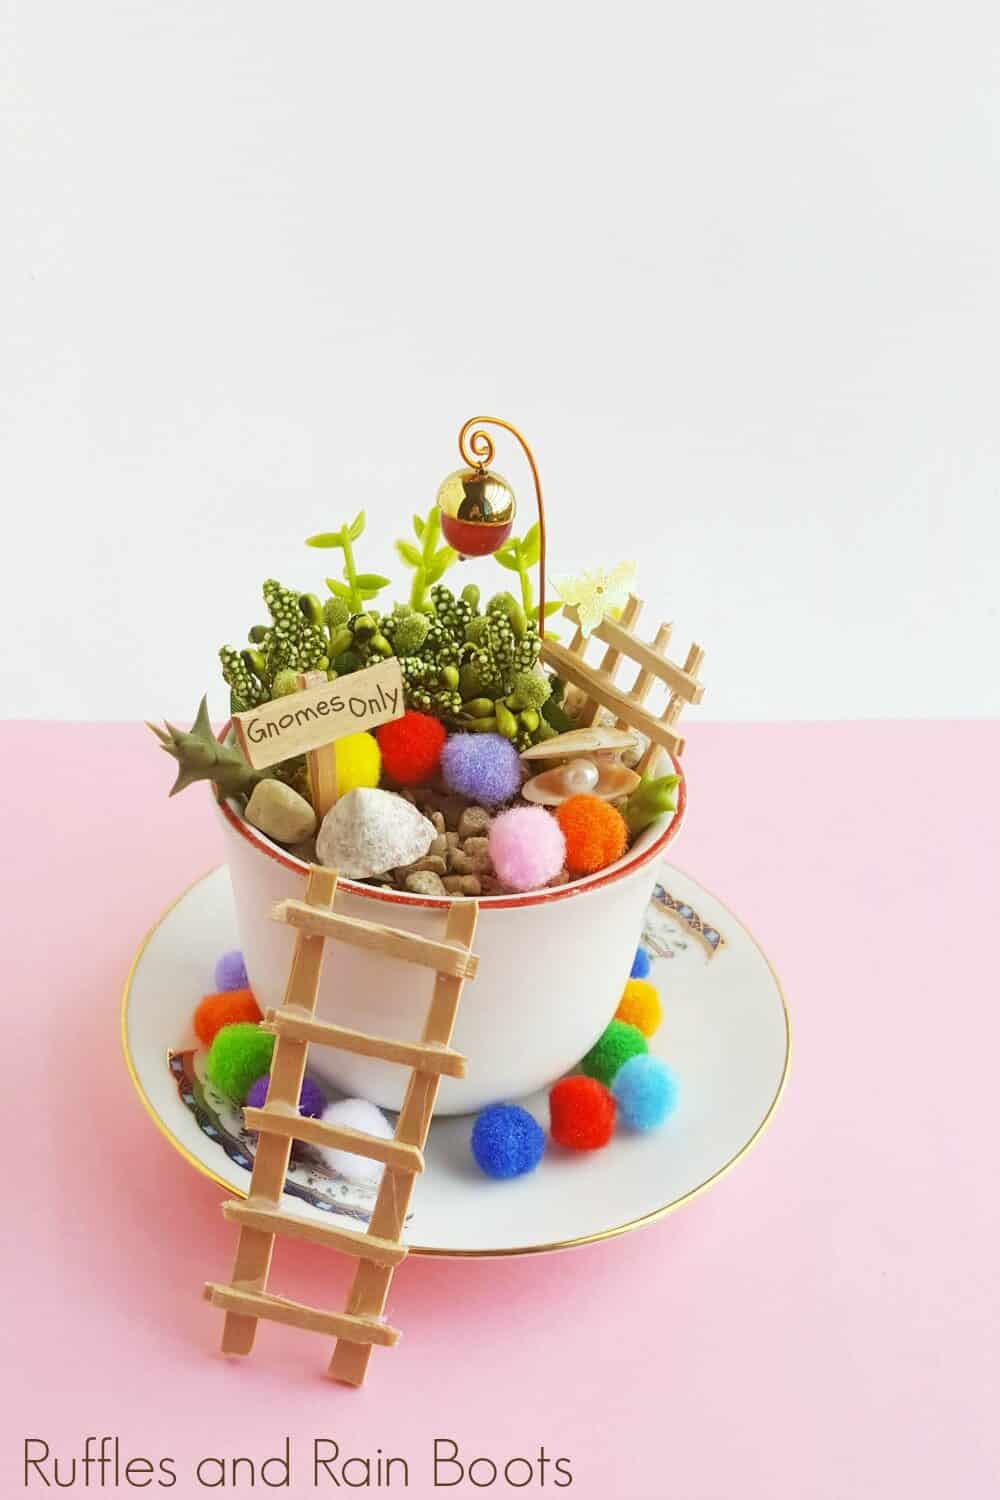 Vertical image of a spring craft idea for a gnome teacup garden on a white and pink background.